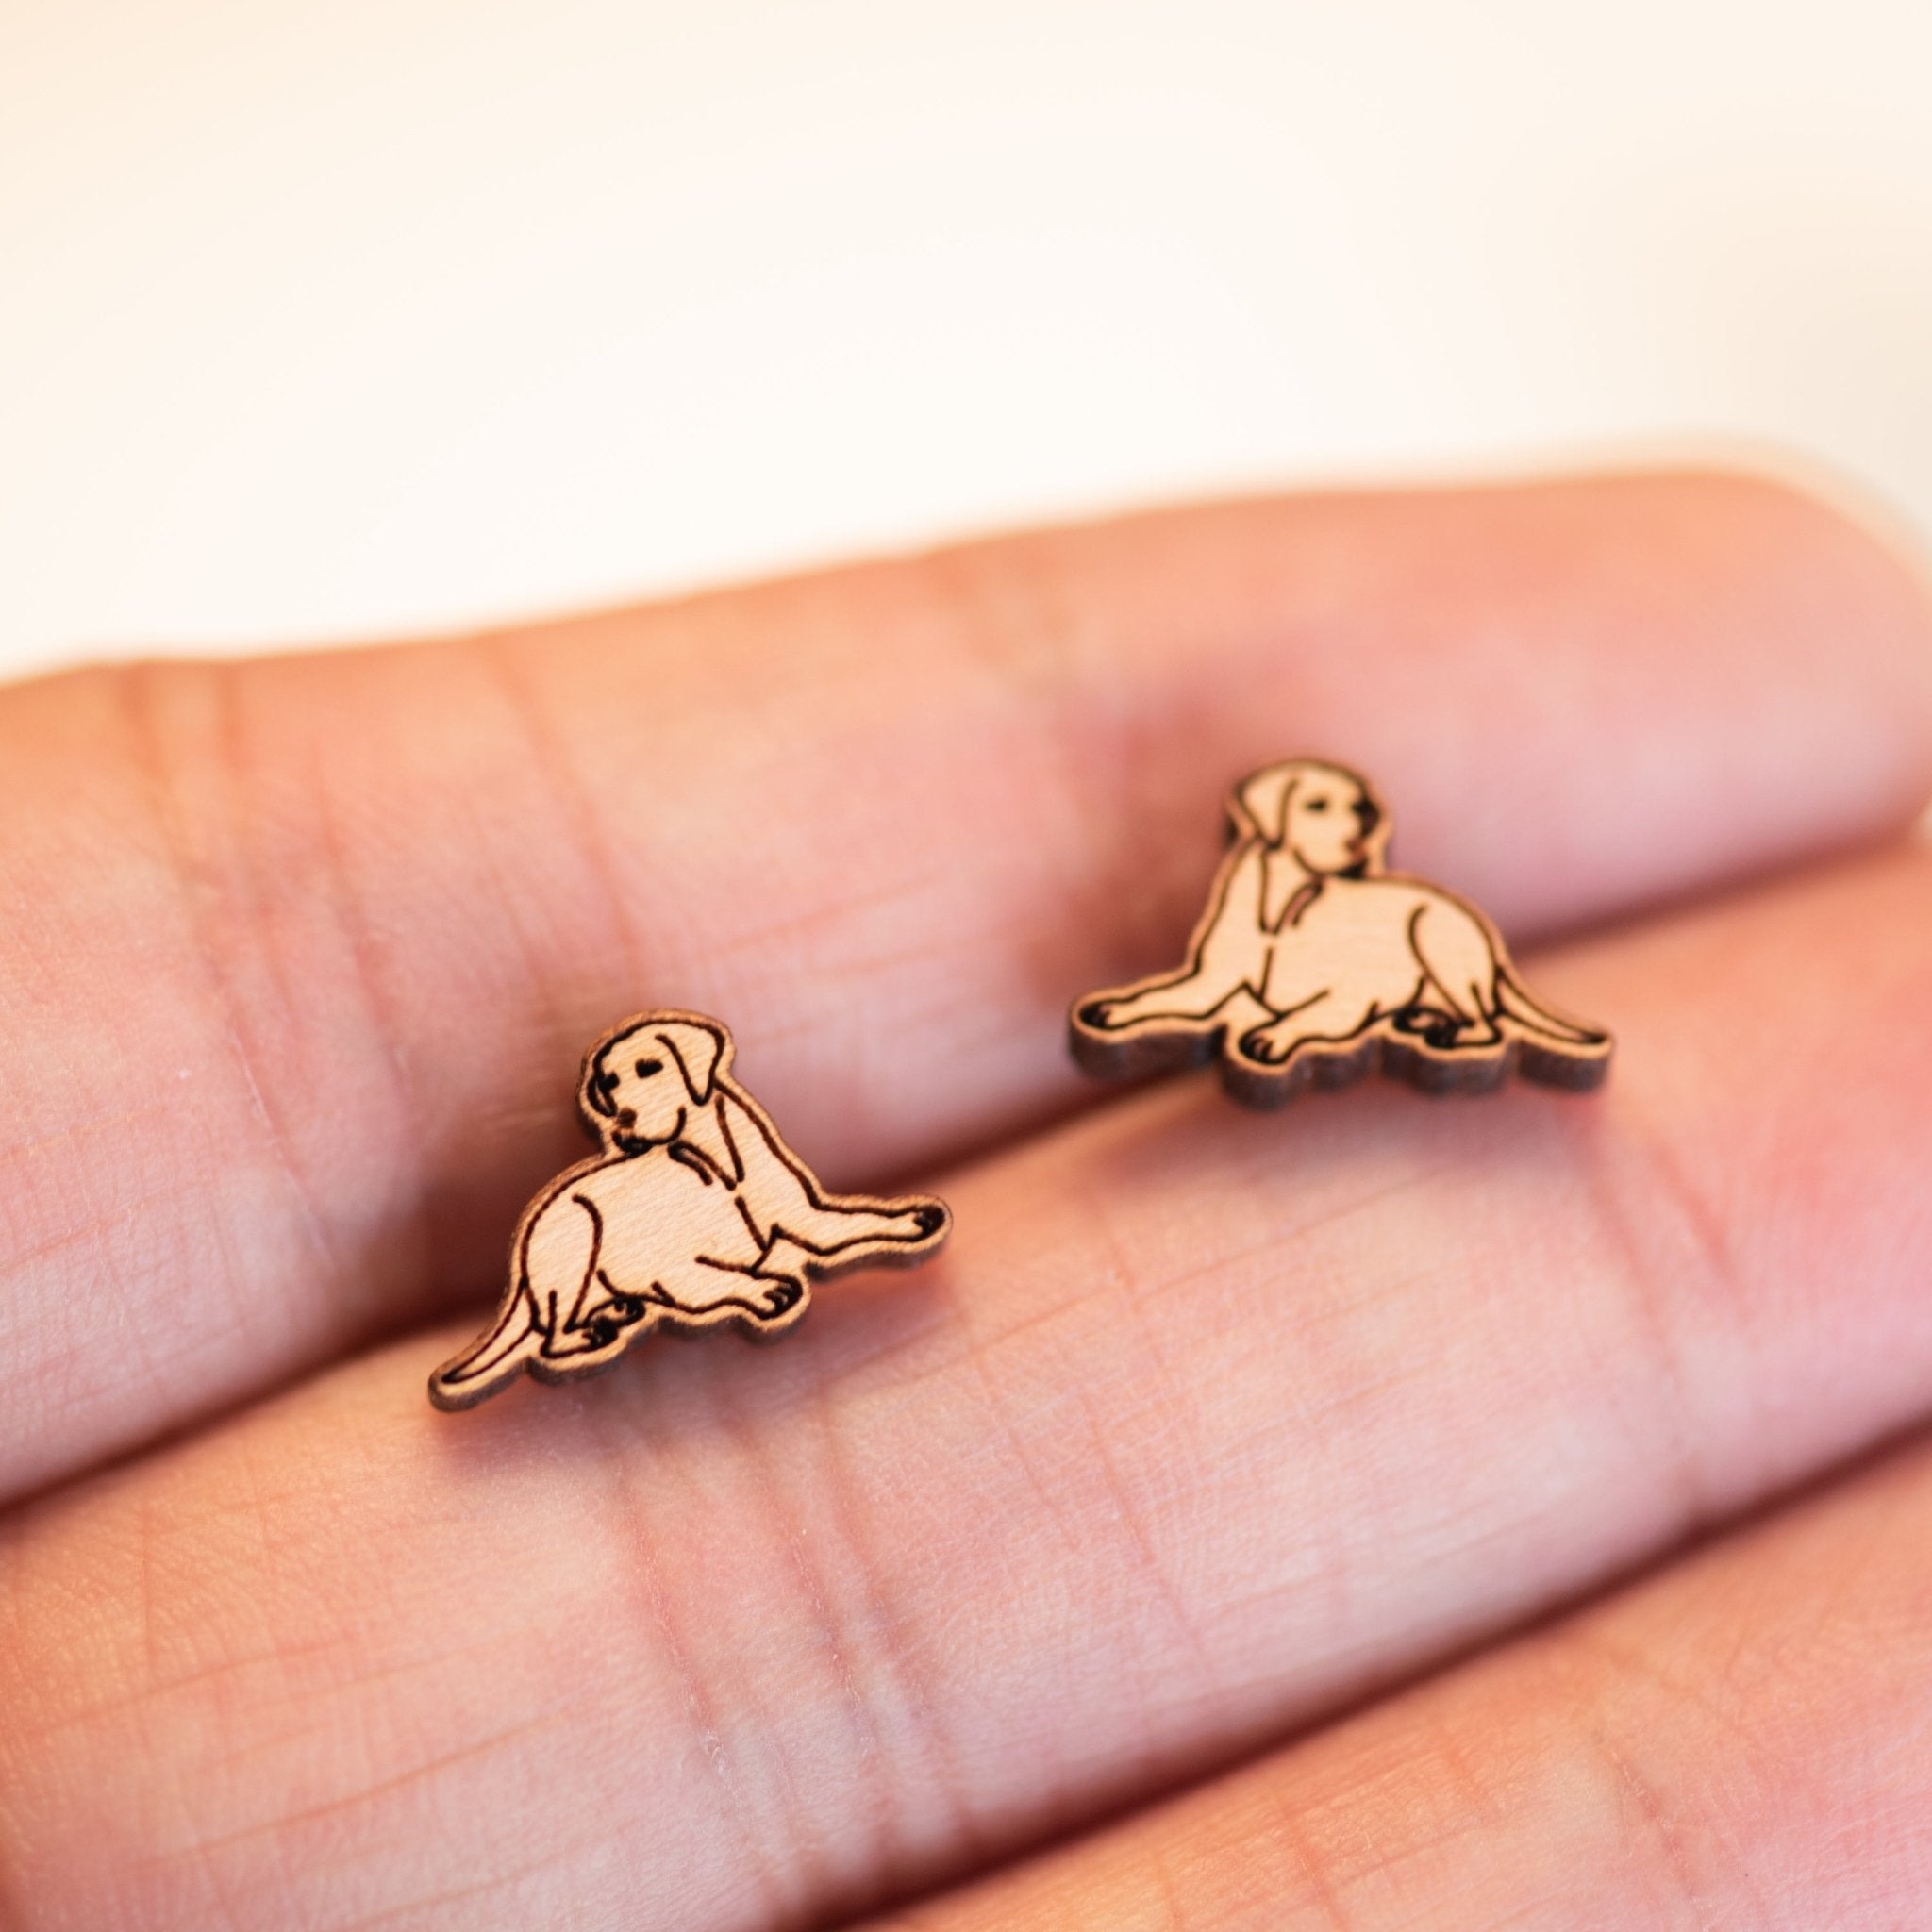 Labrador Dog (full body) Cherry Wood Stud Earrings - EL10132 - Robin Valley Official Store